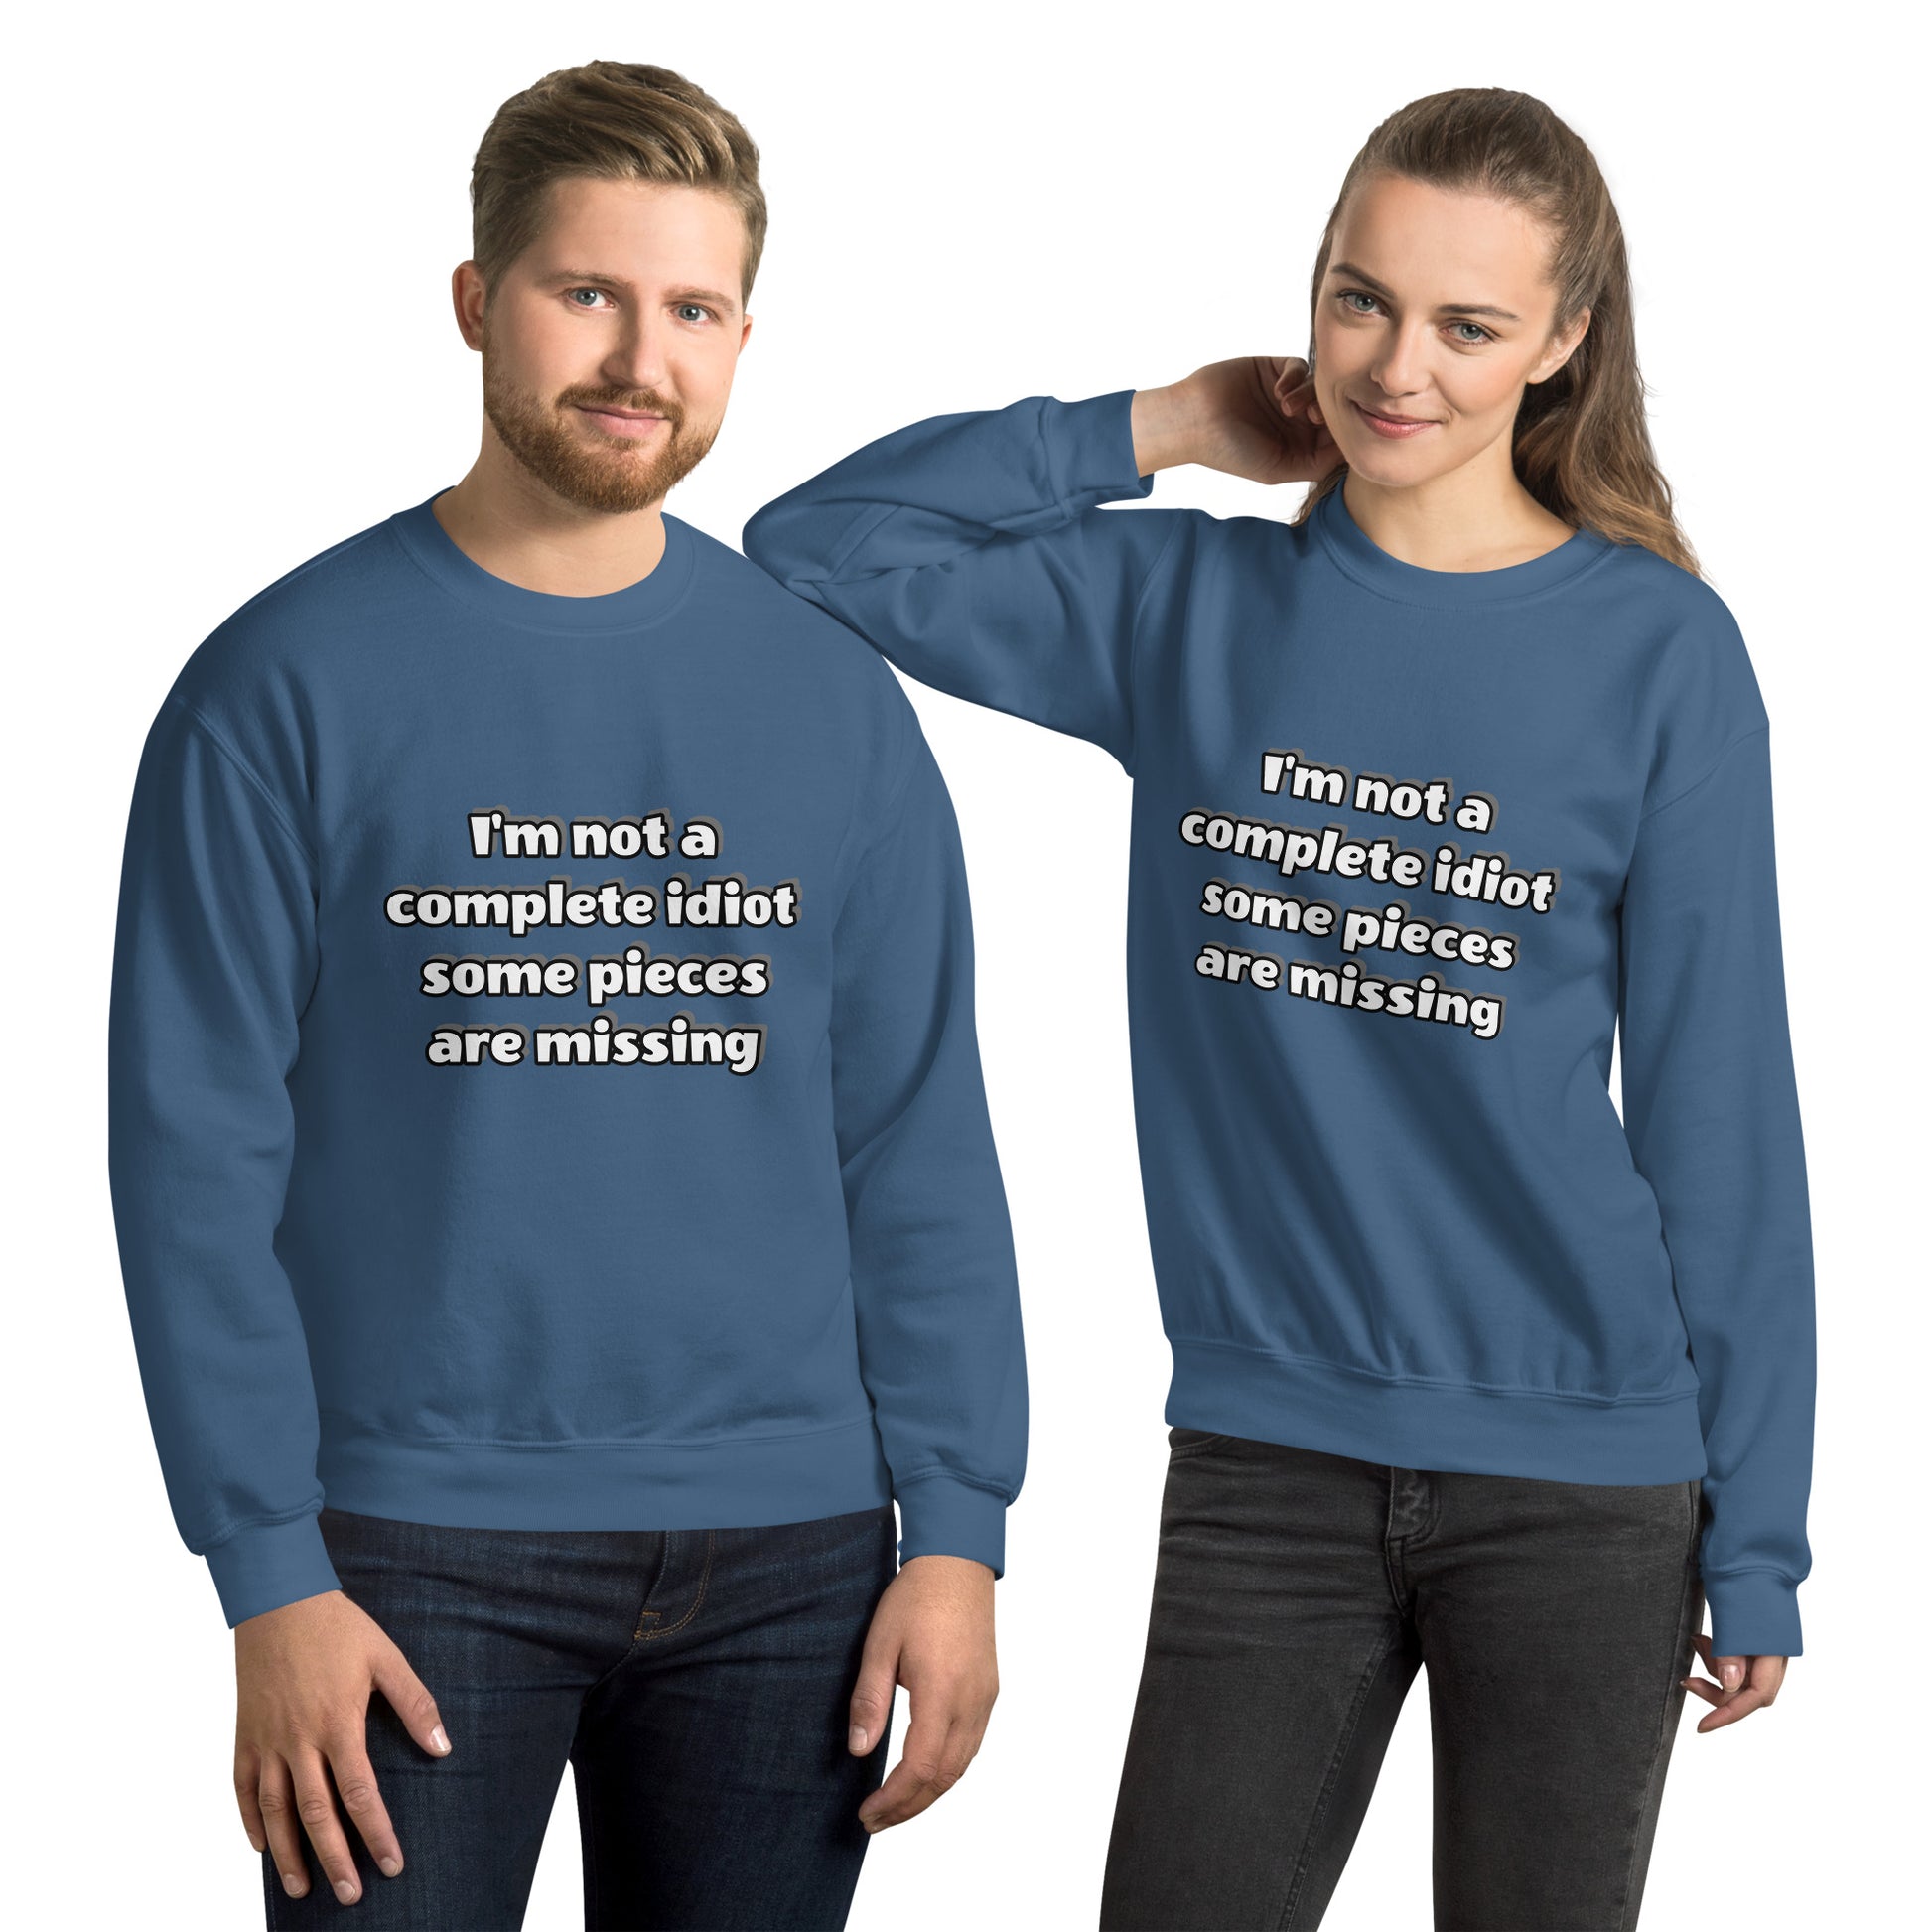 Man and women with indigo blue sweatshirt with text “I’m not a complete idiot, some pieces are missing”